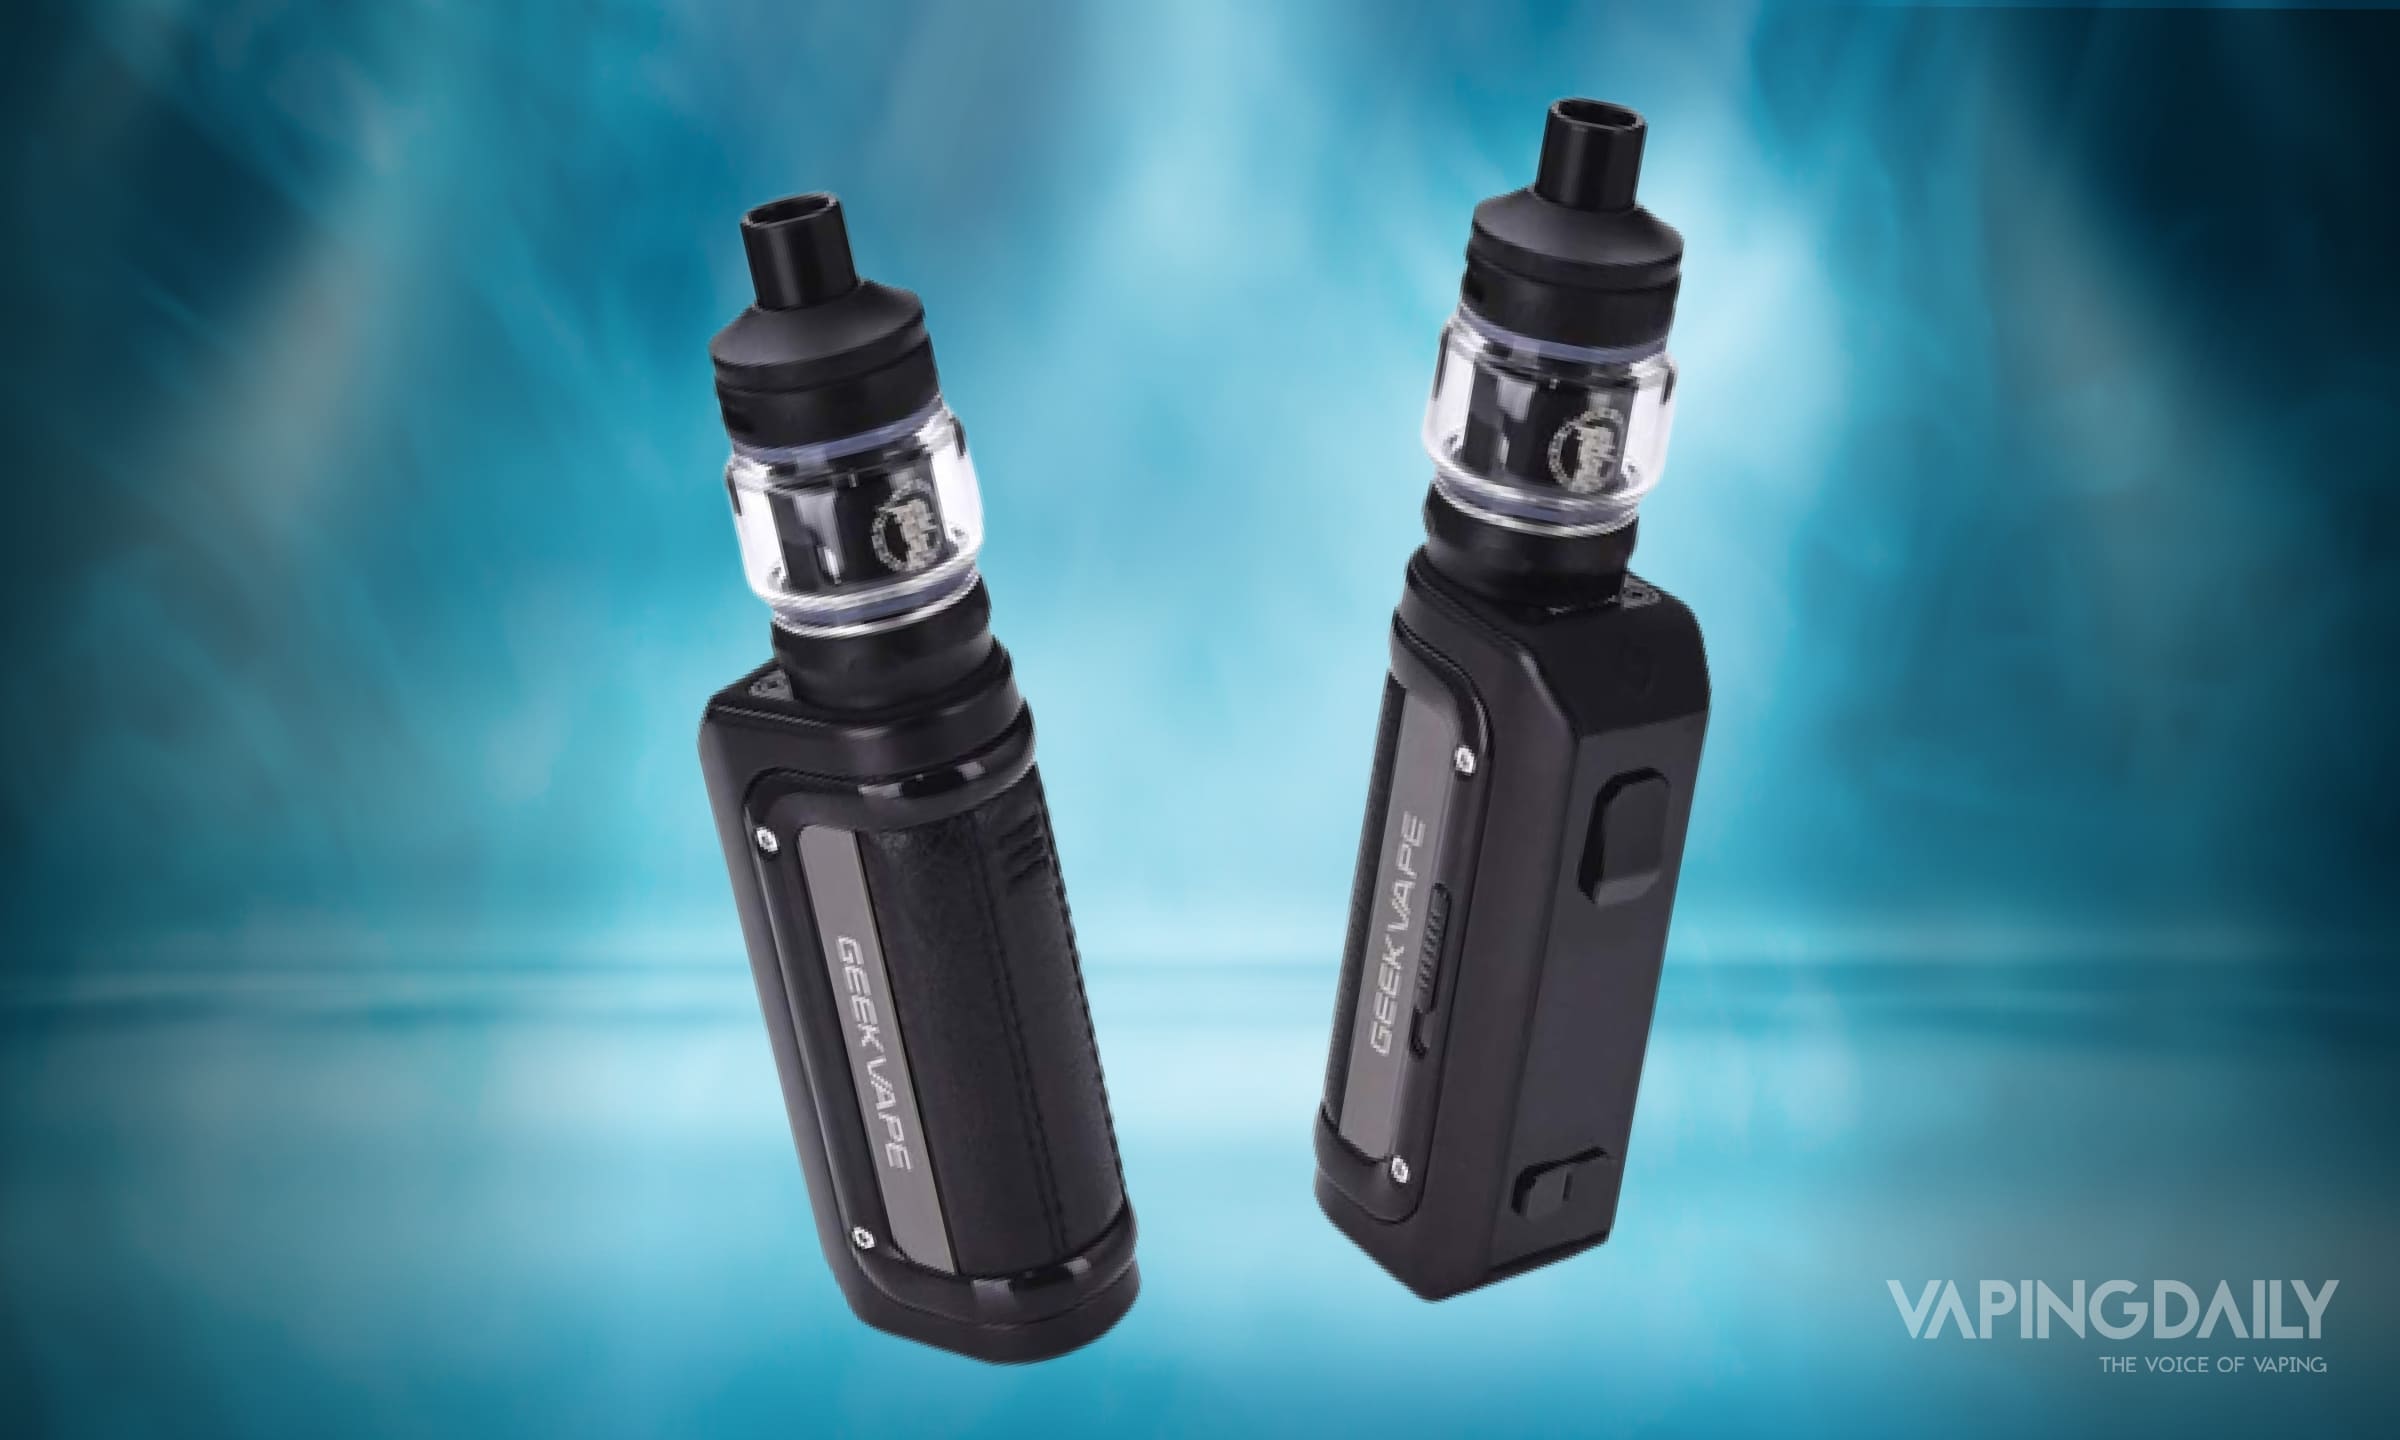 The GeekVape M100: A Succulent and Durable Vape